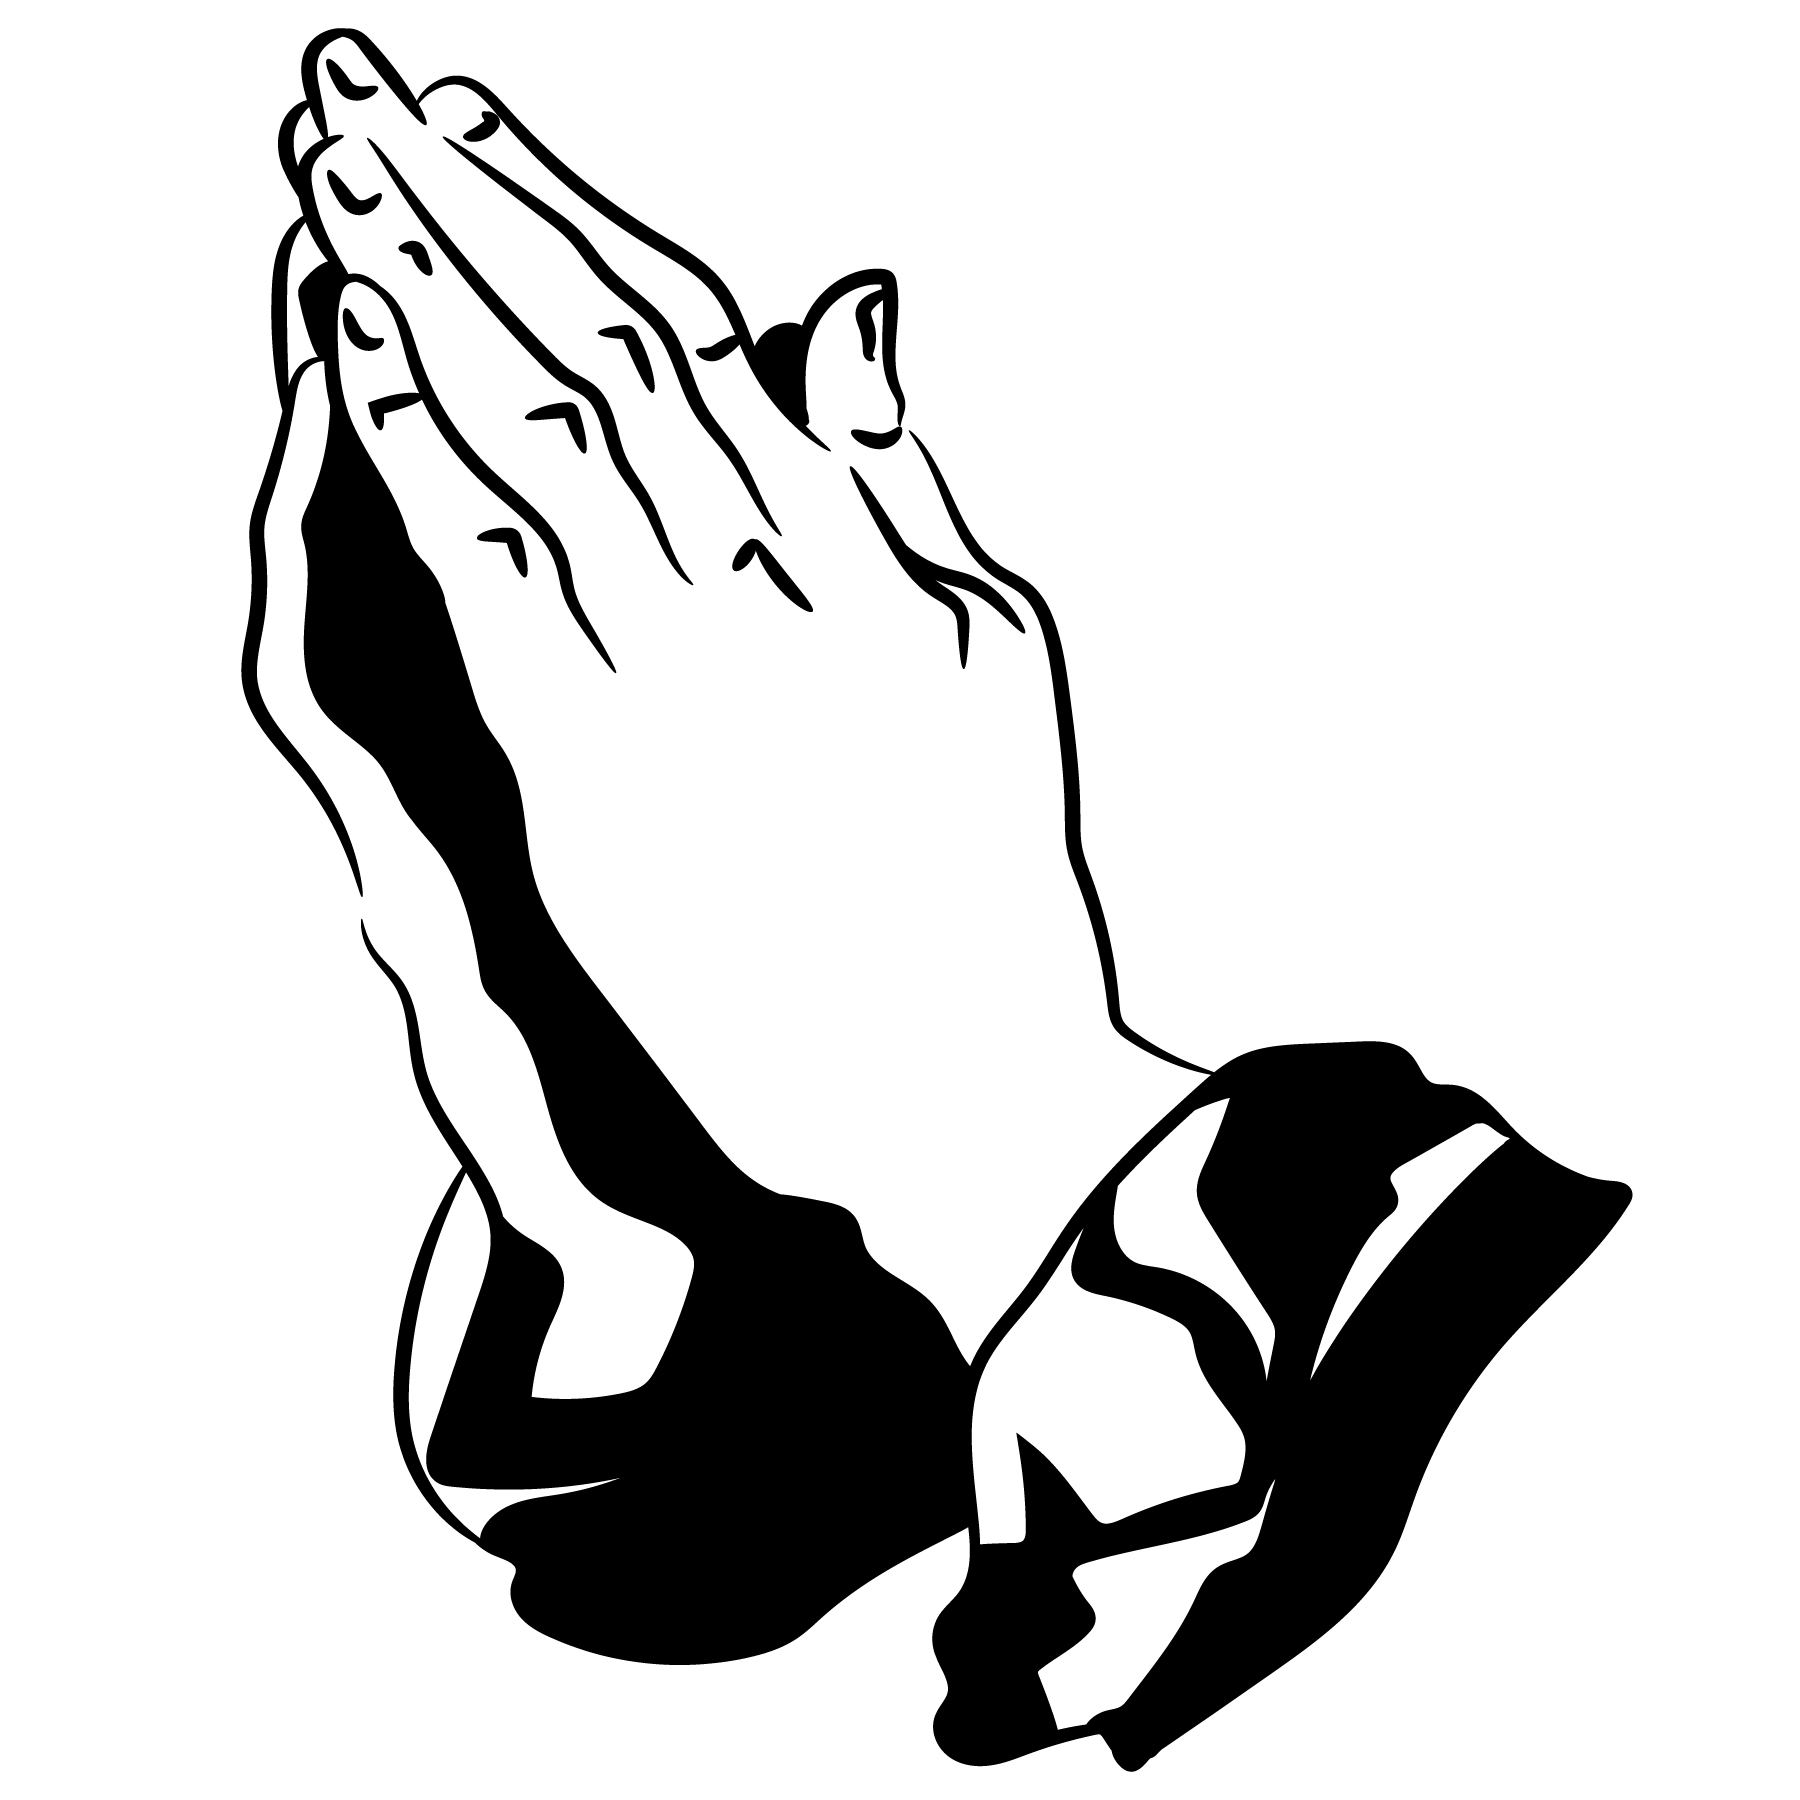 Vector Of Praying Hands Praying Hands Csp15005684 Search Clip Art Images